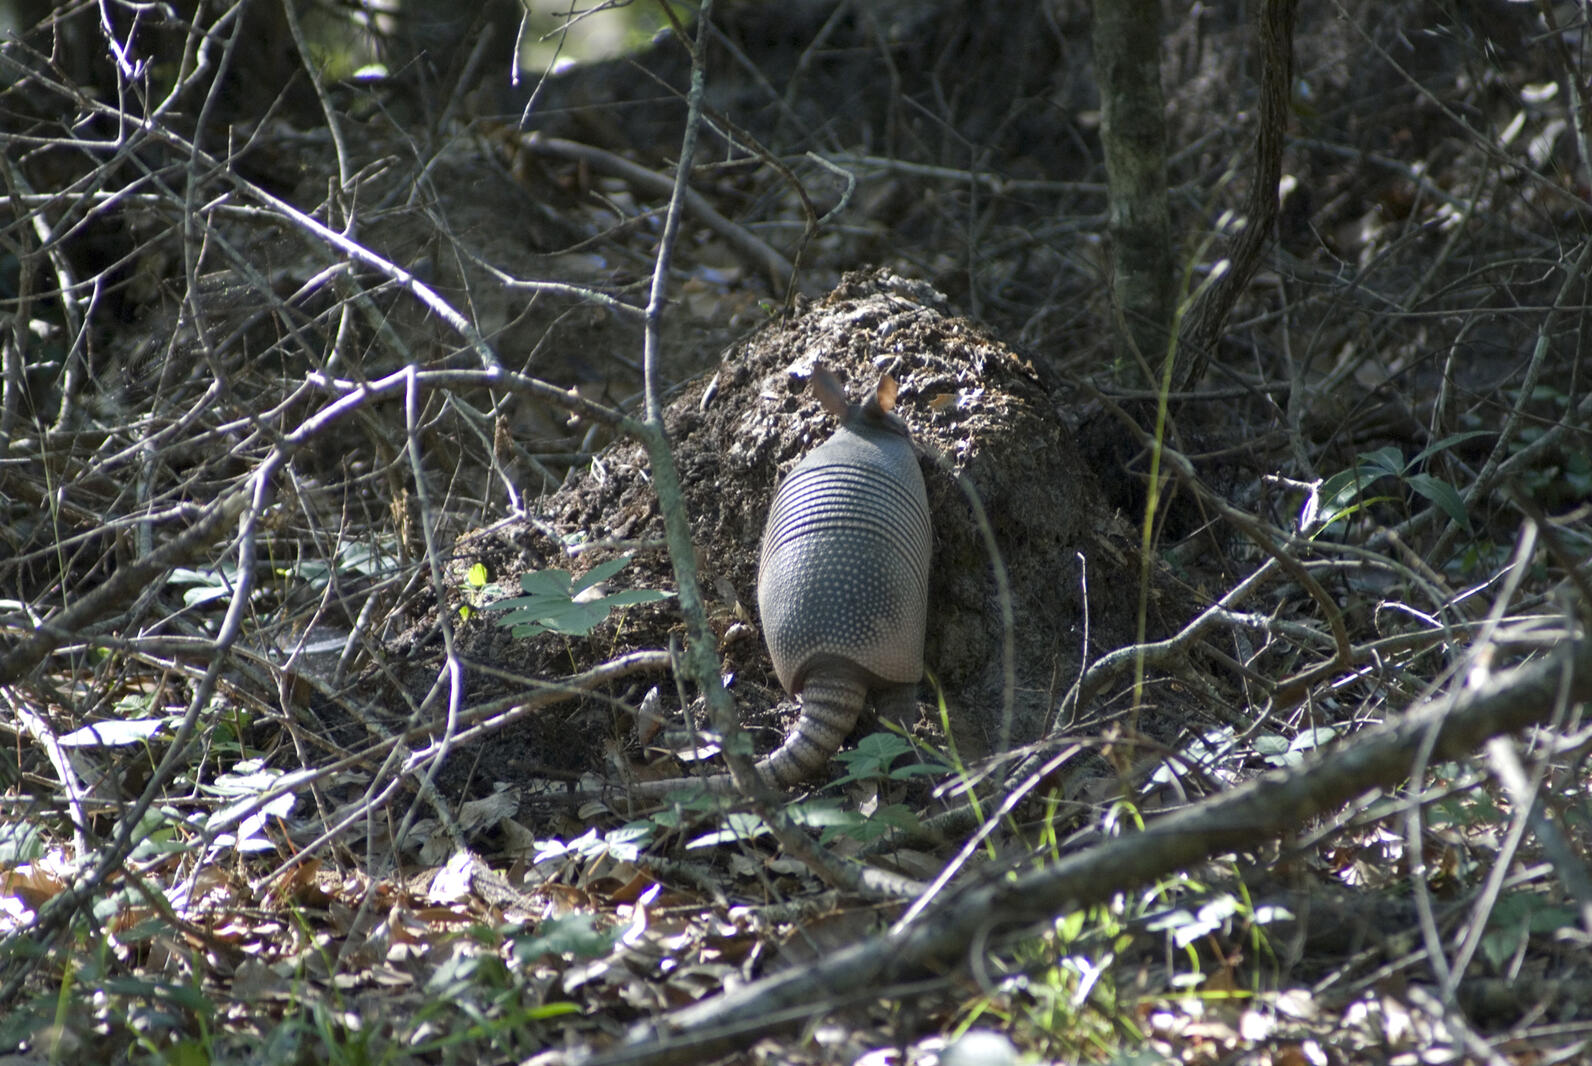 An armadillo climbs a small mound of dirt in pursuit of invertebrates.